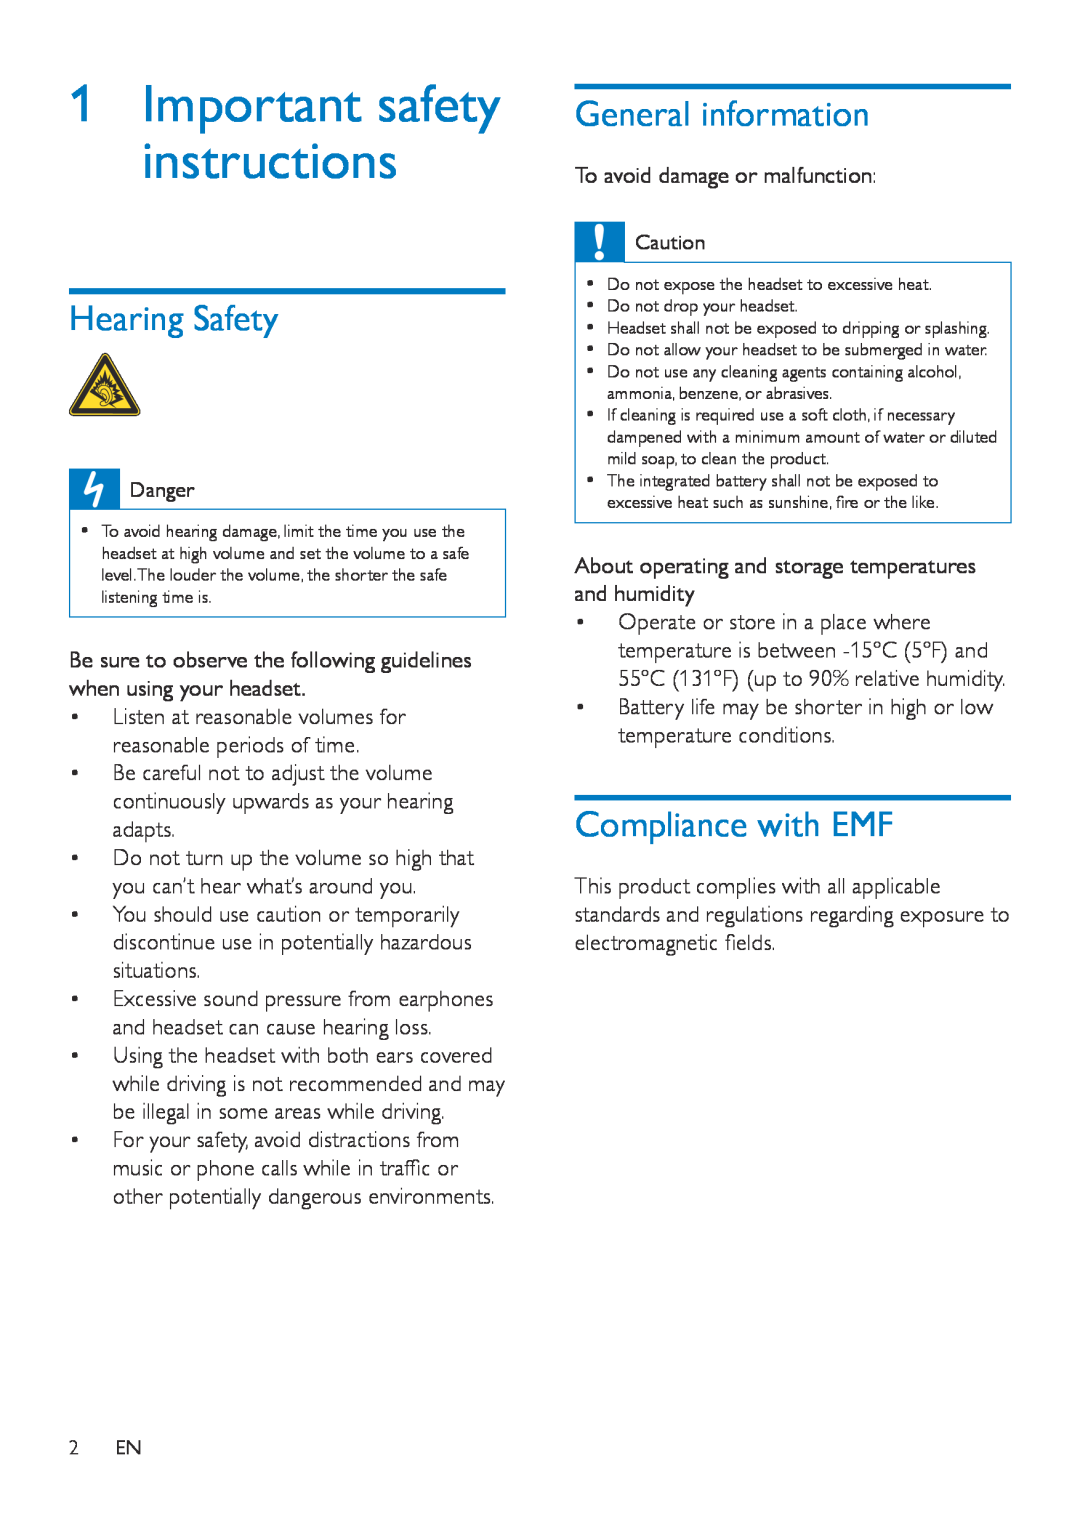 Philips M2BT user manual 1Important safety instructions, Hearing Safety, General information, Compliance with EMF 